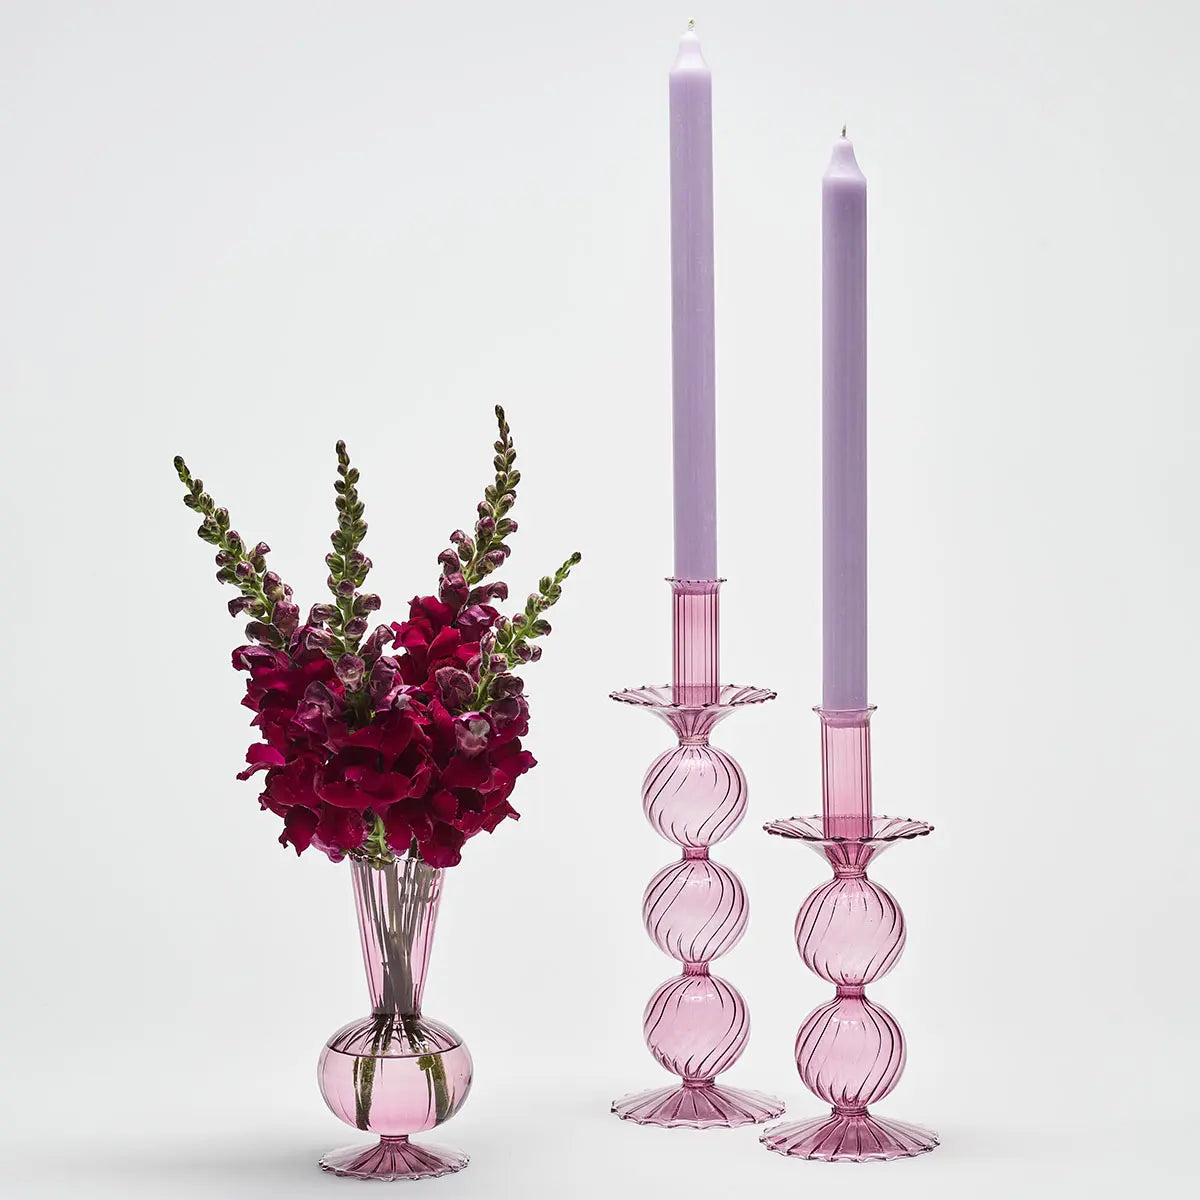 Kim Seybert Bella Lavender Candlesticks set with flowers and candles